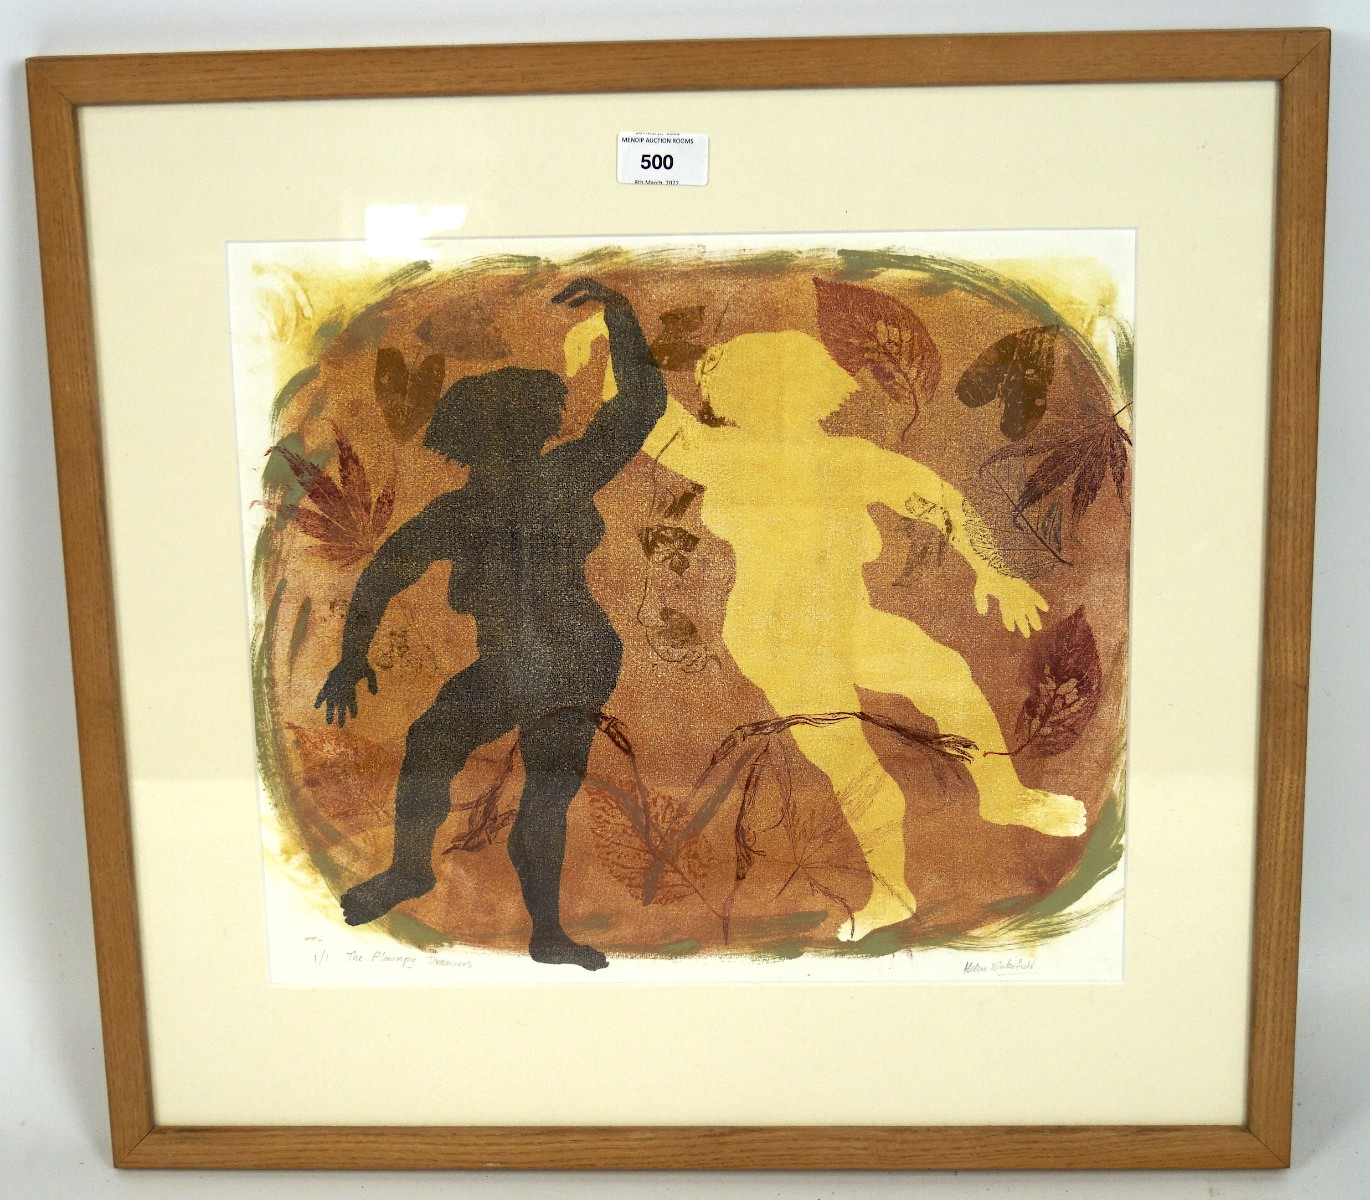 Helen Wakefield, (British, 21st Century), The Plumpy Dancers, mono print, signed and titled,